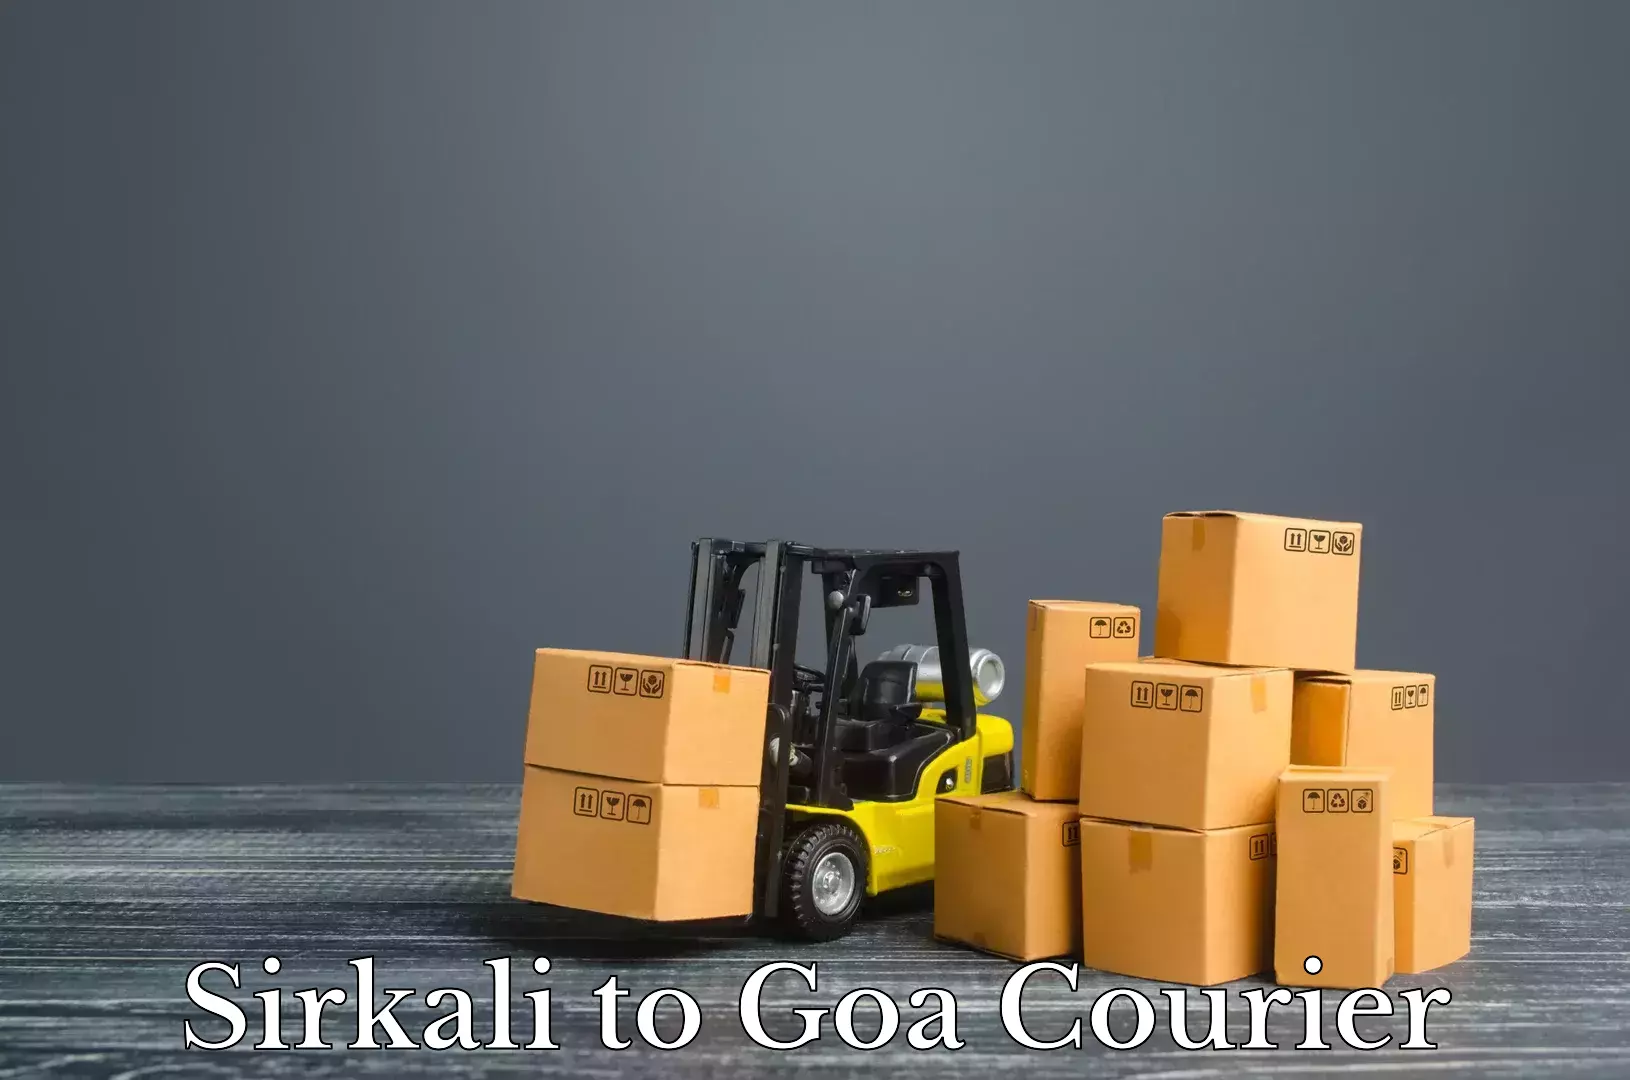 Luggage shipment specialists in Sirkali to Goa